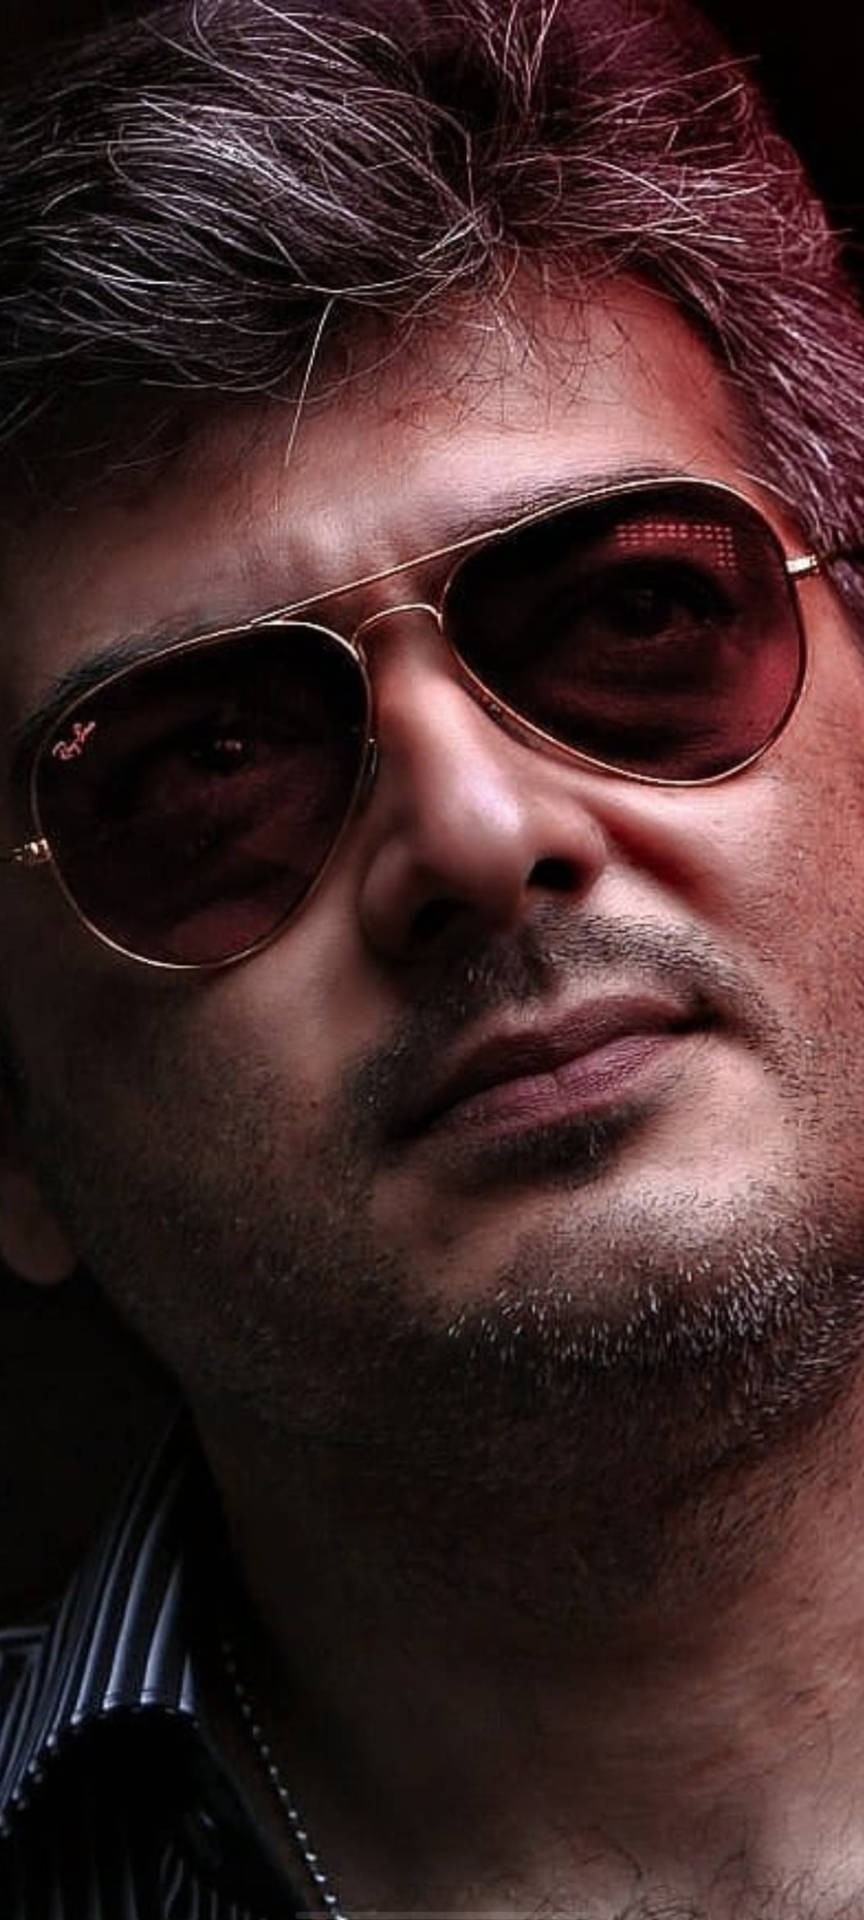 Thala Ajith With Sunglasses Background